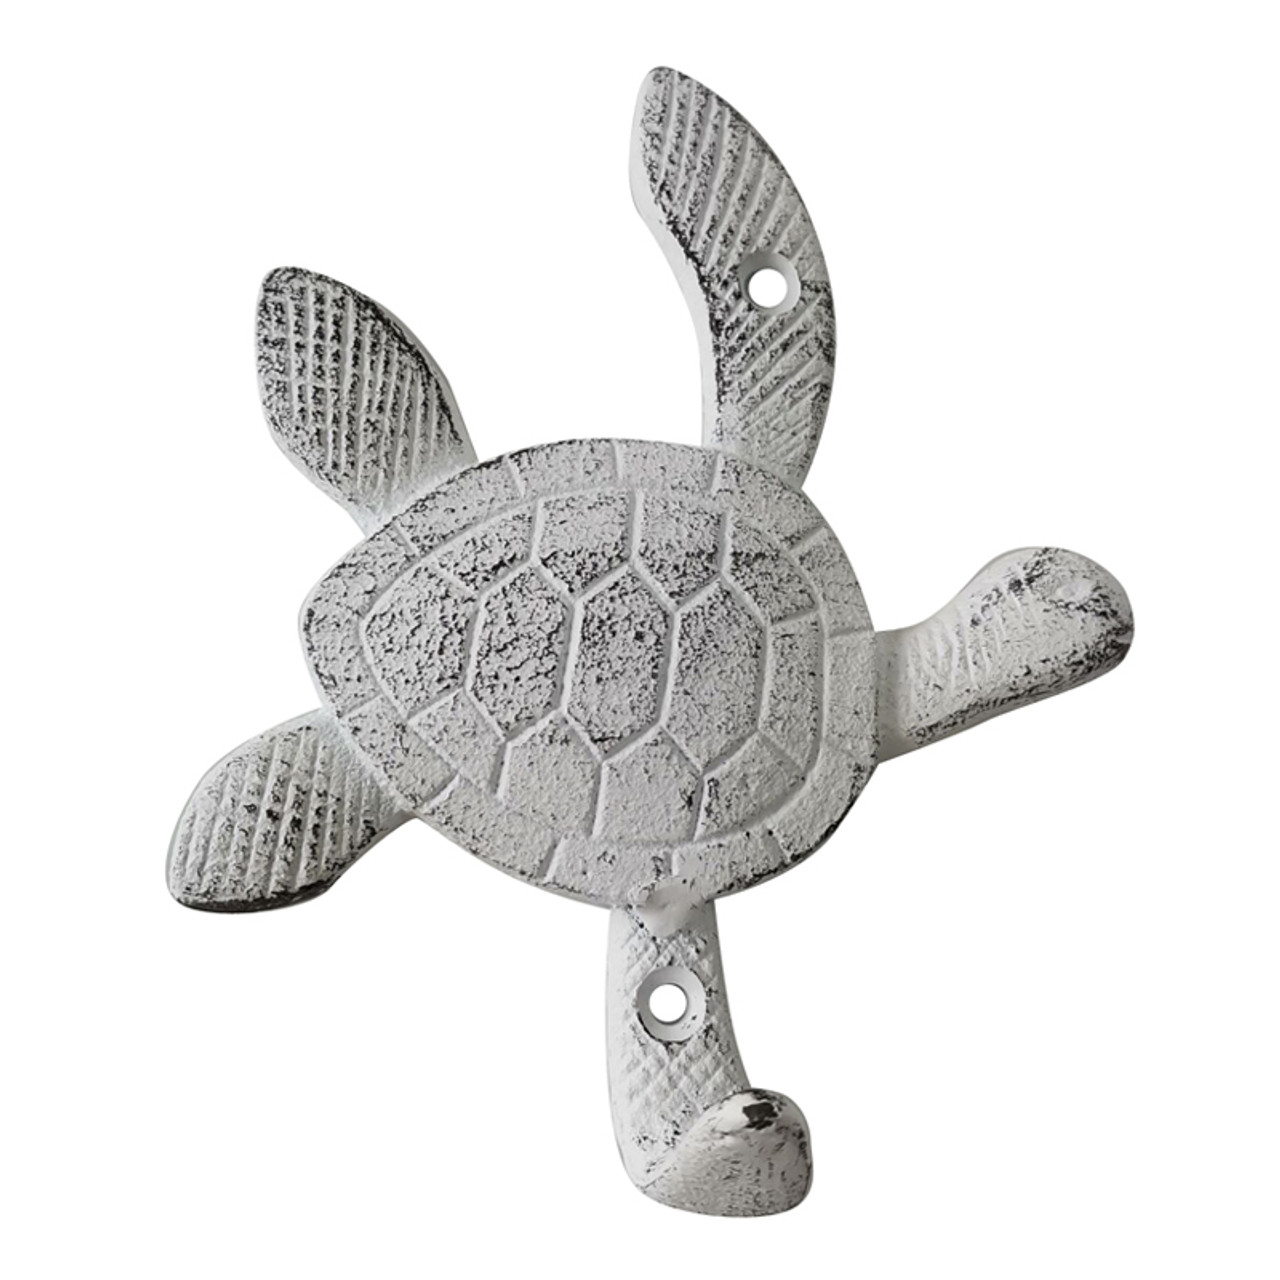 https://cdn11.bigcommerce.com/s-36f60/images/stencil/1280x1280/products/9267/21103/73688-white-sea-turtle-hook__31550.1683045106.jpg?c=2